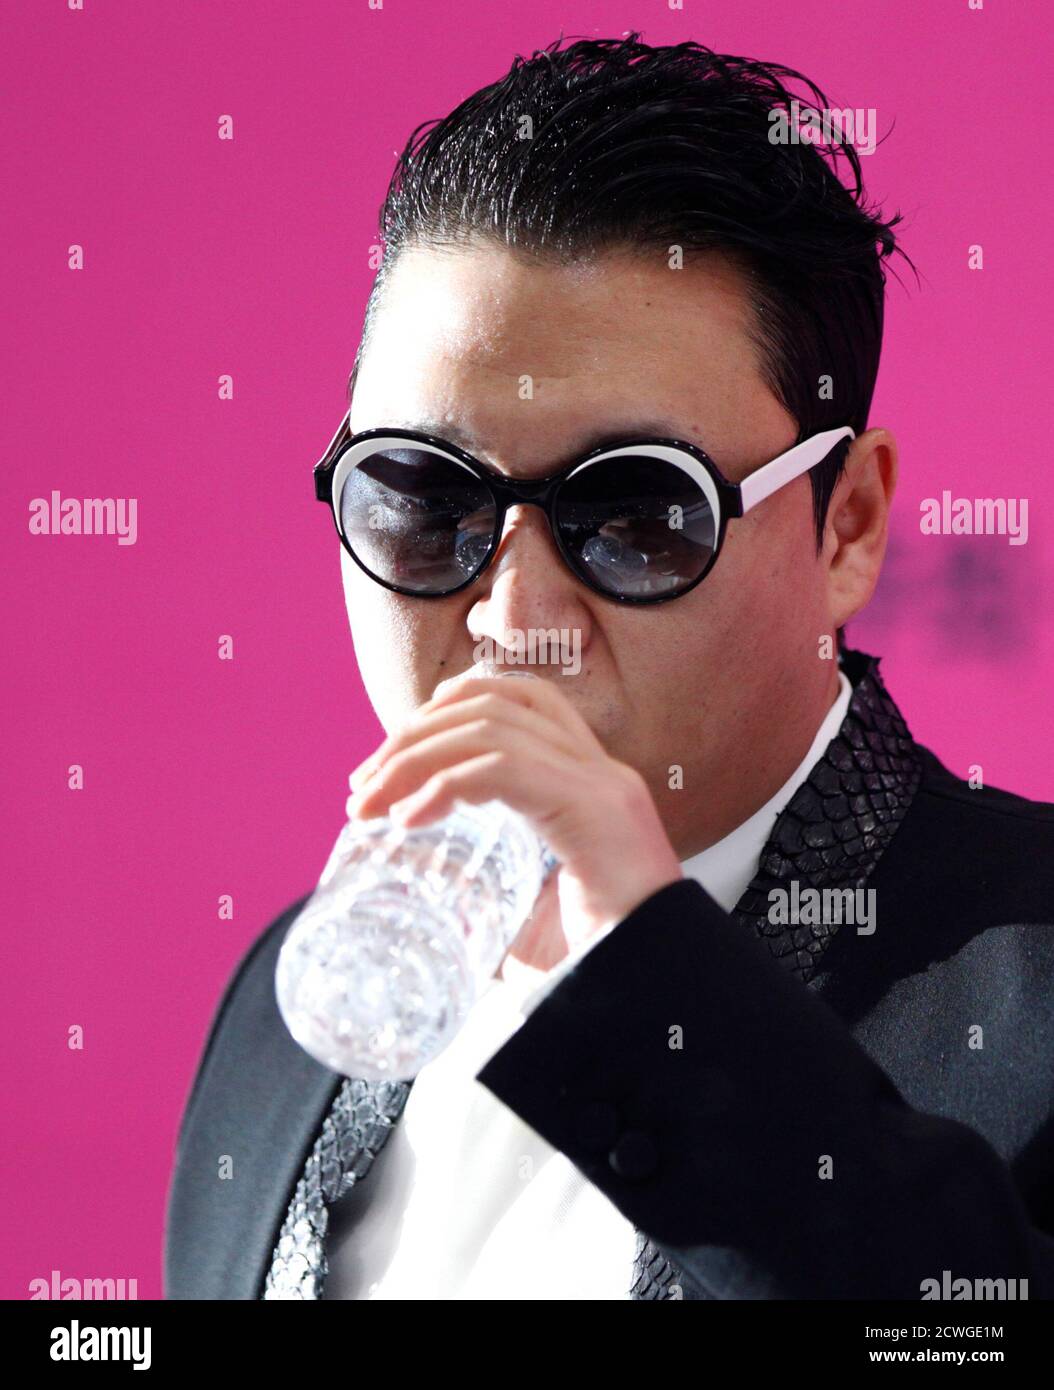 South Korean rapper Psy drinks water during a news conference before his  concert in Seoul April 13, 2013. Psy will perform "Gentleman" in public for  the first time on Saturday at a